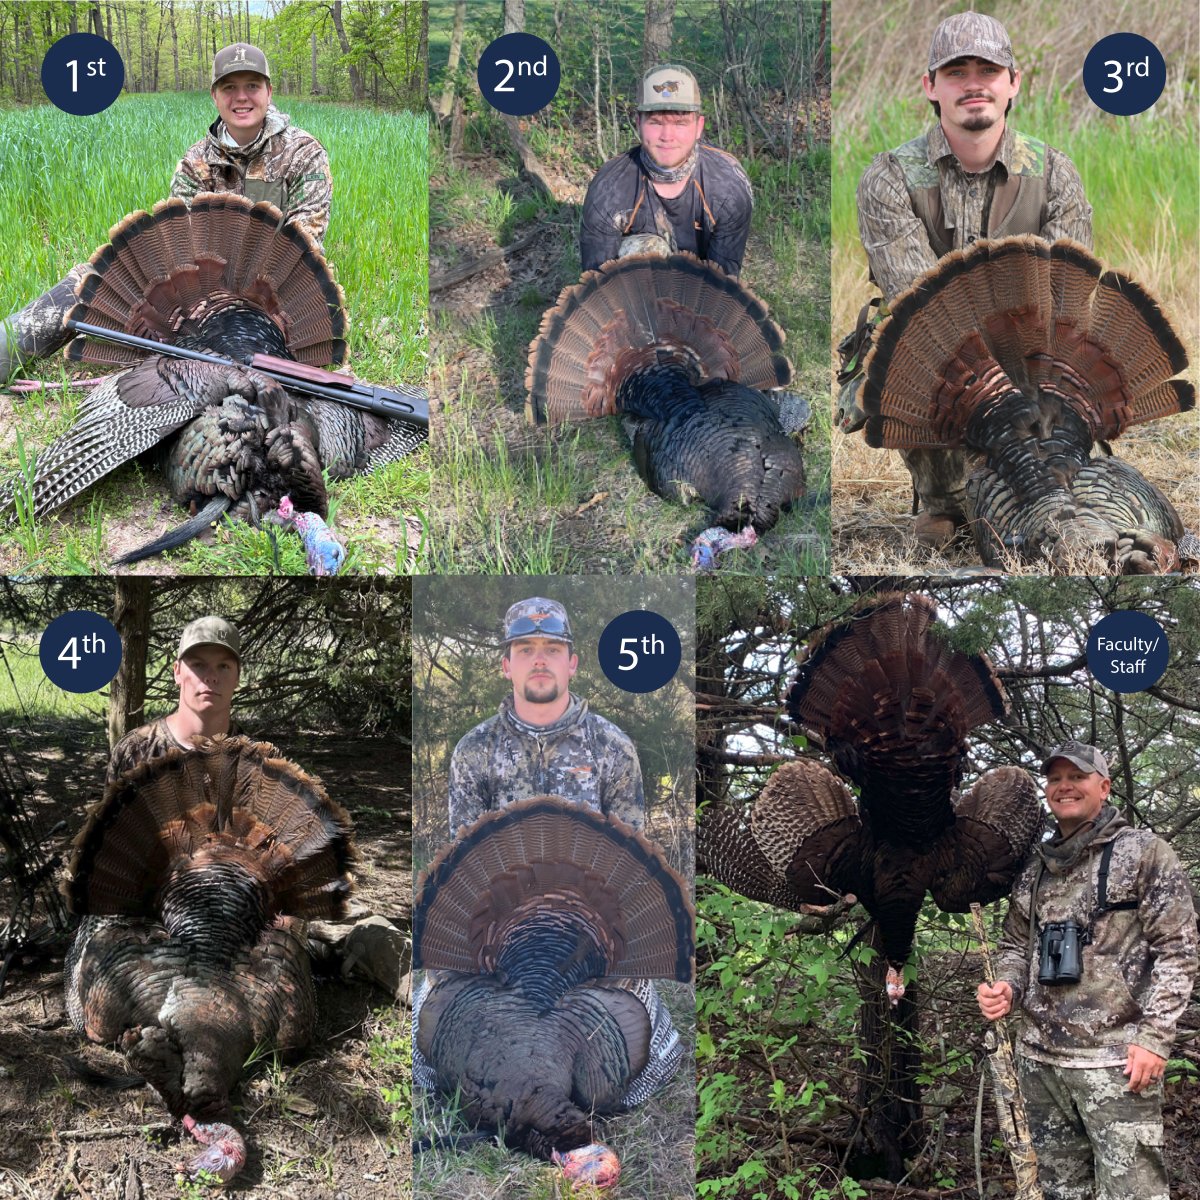 Congratulations to our recent Thunder Turkey Hunt winners! First Place – Hunter Engelbrecht Second Place – Jaydin Rowden Third Place – Riley Glenn Fourth Place – Tyler Burgin Fifth Place – Jacob Uthe Faculty/Staff Winner – Cole Schaefer